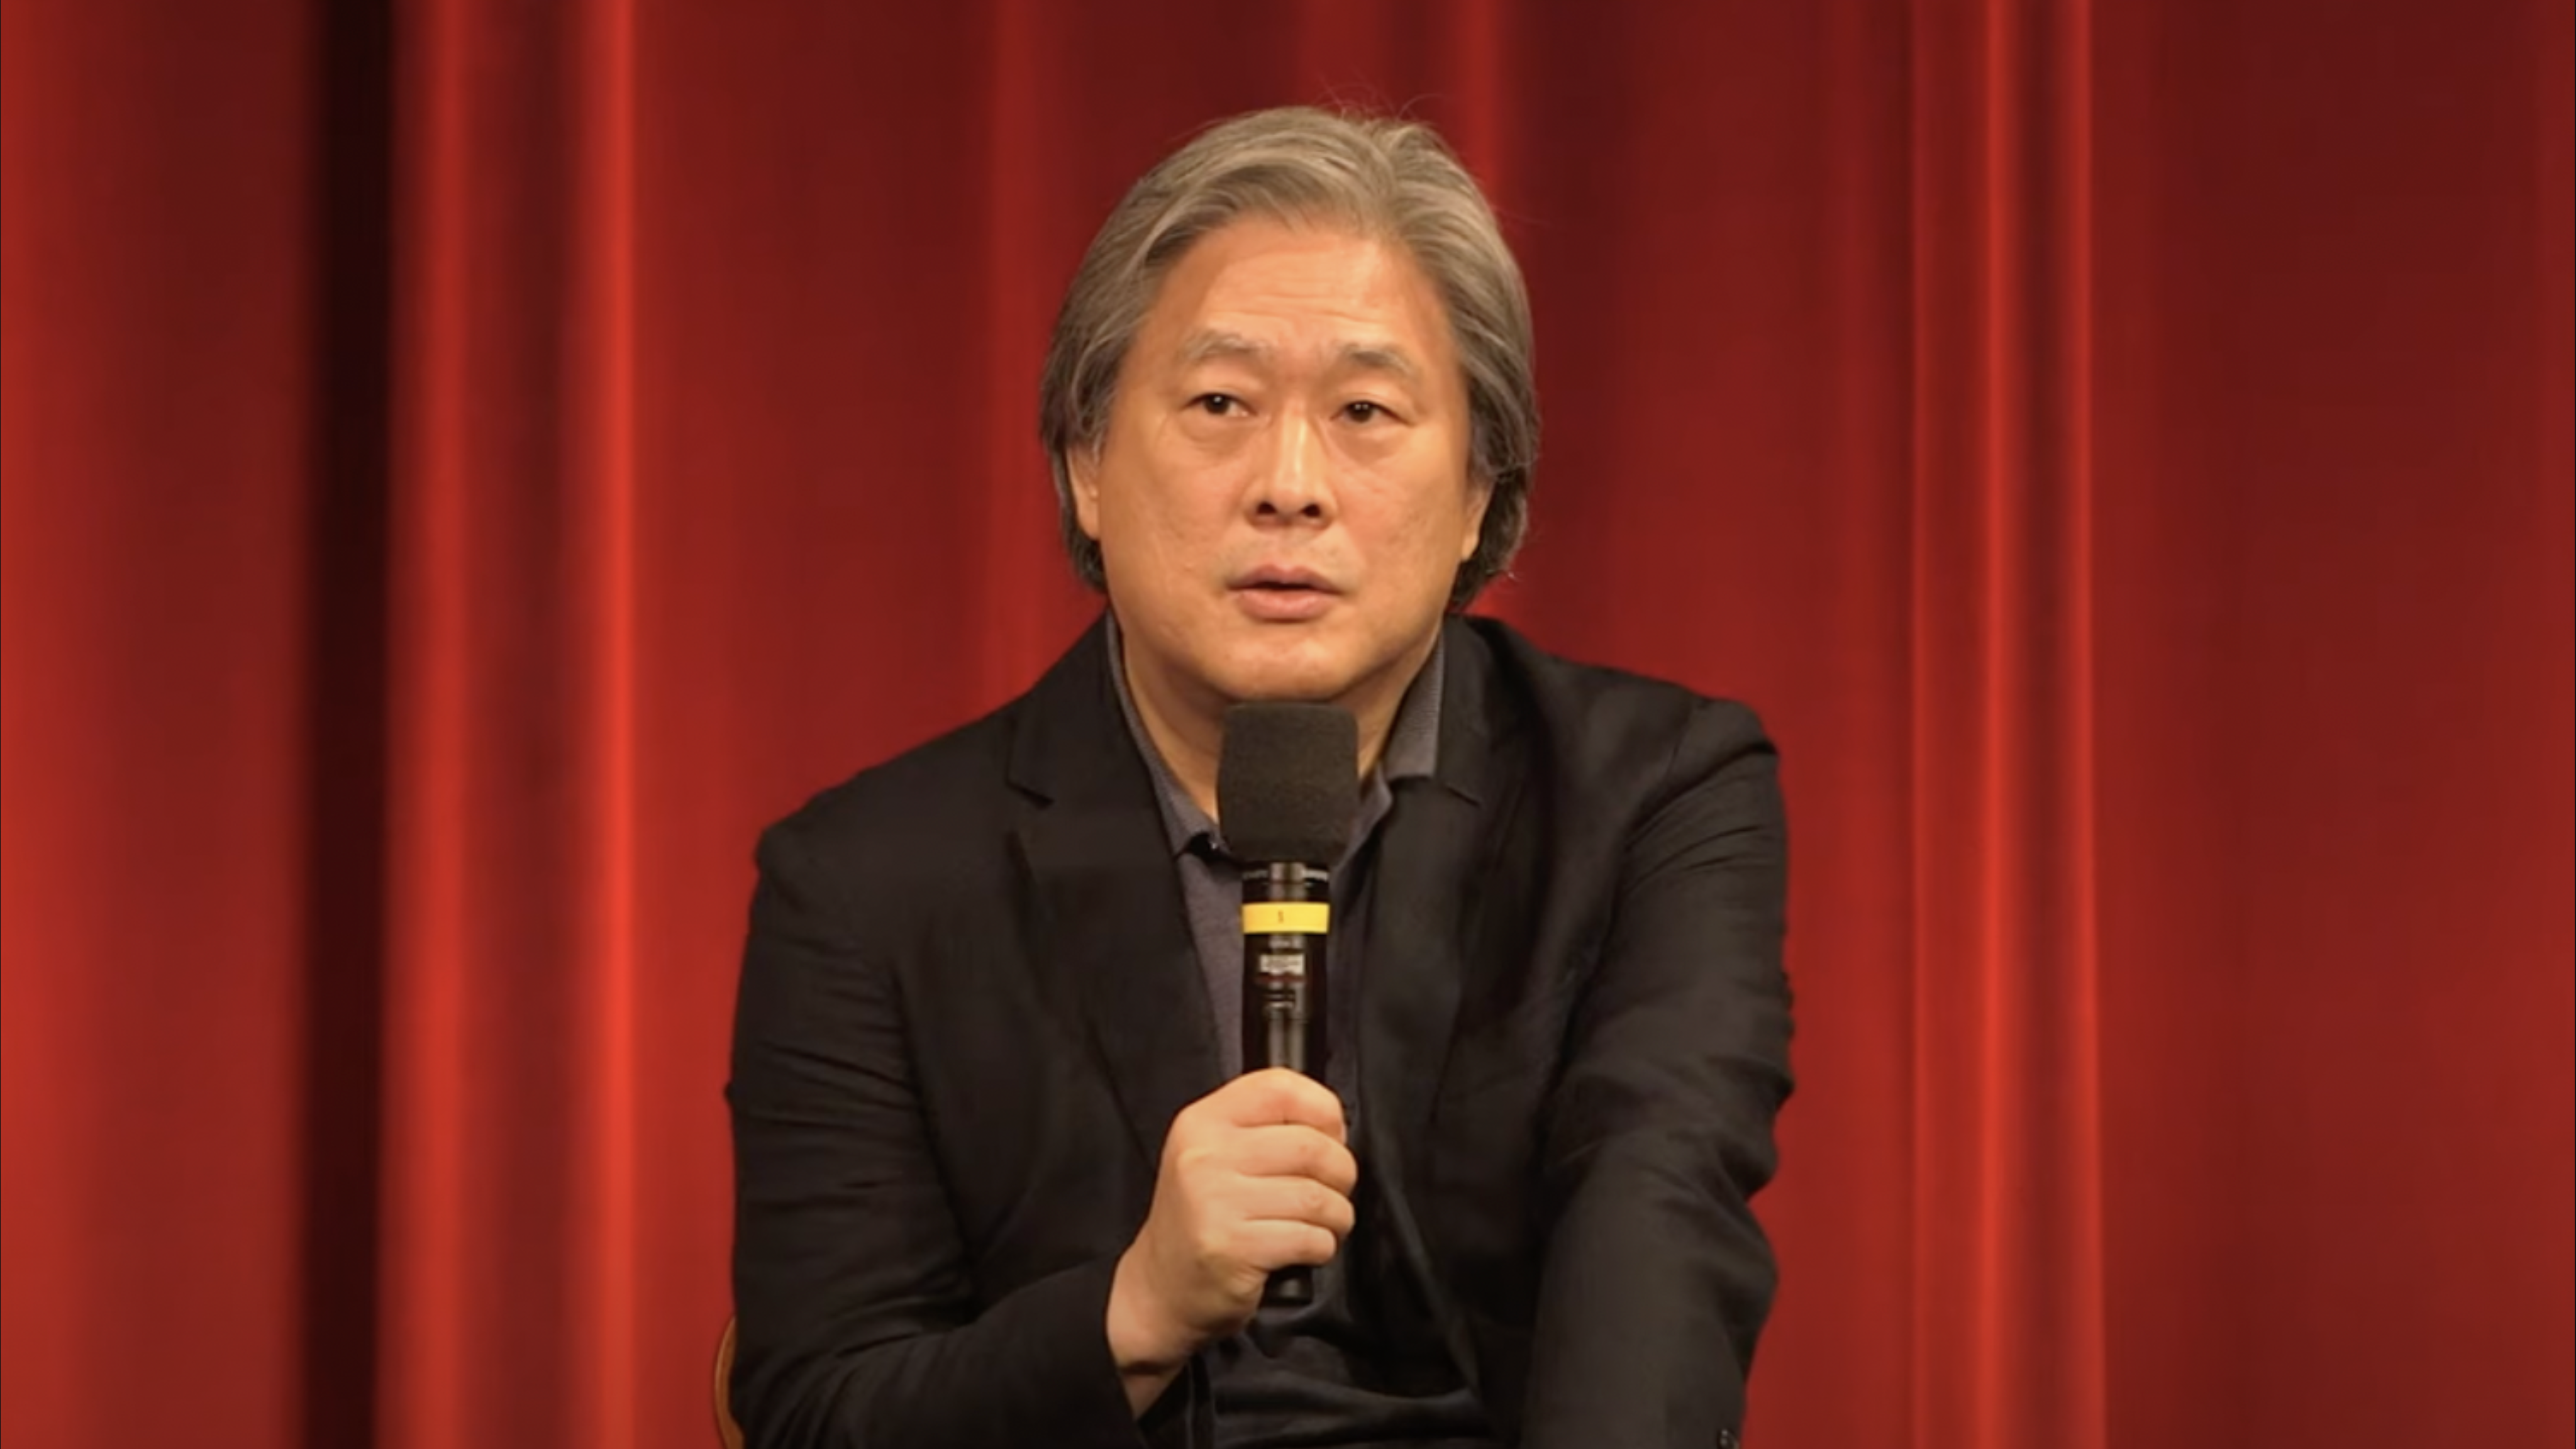 Park Chan-wook speaks into a microphone in front of a red curtain.